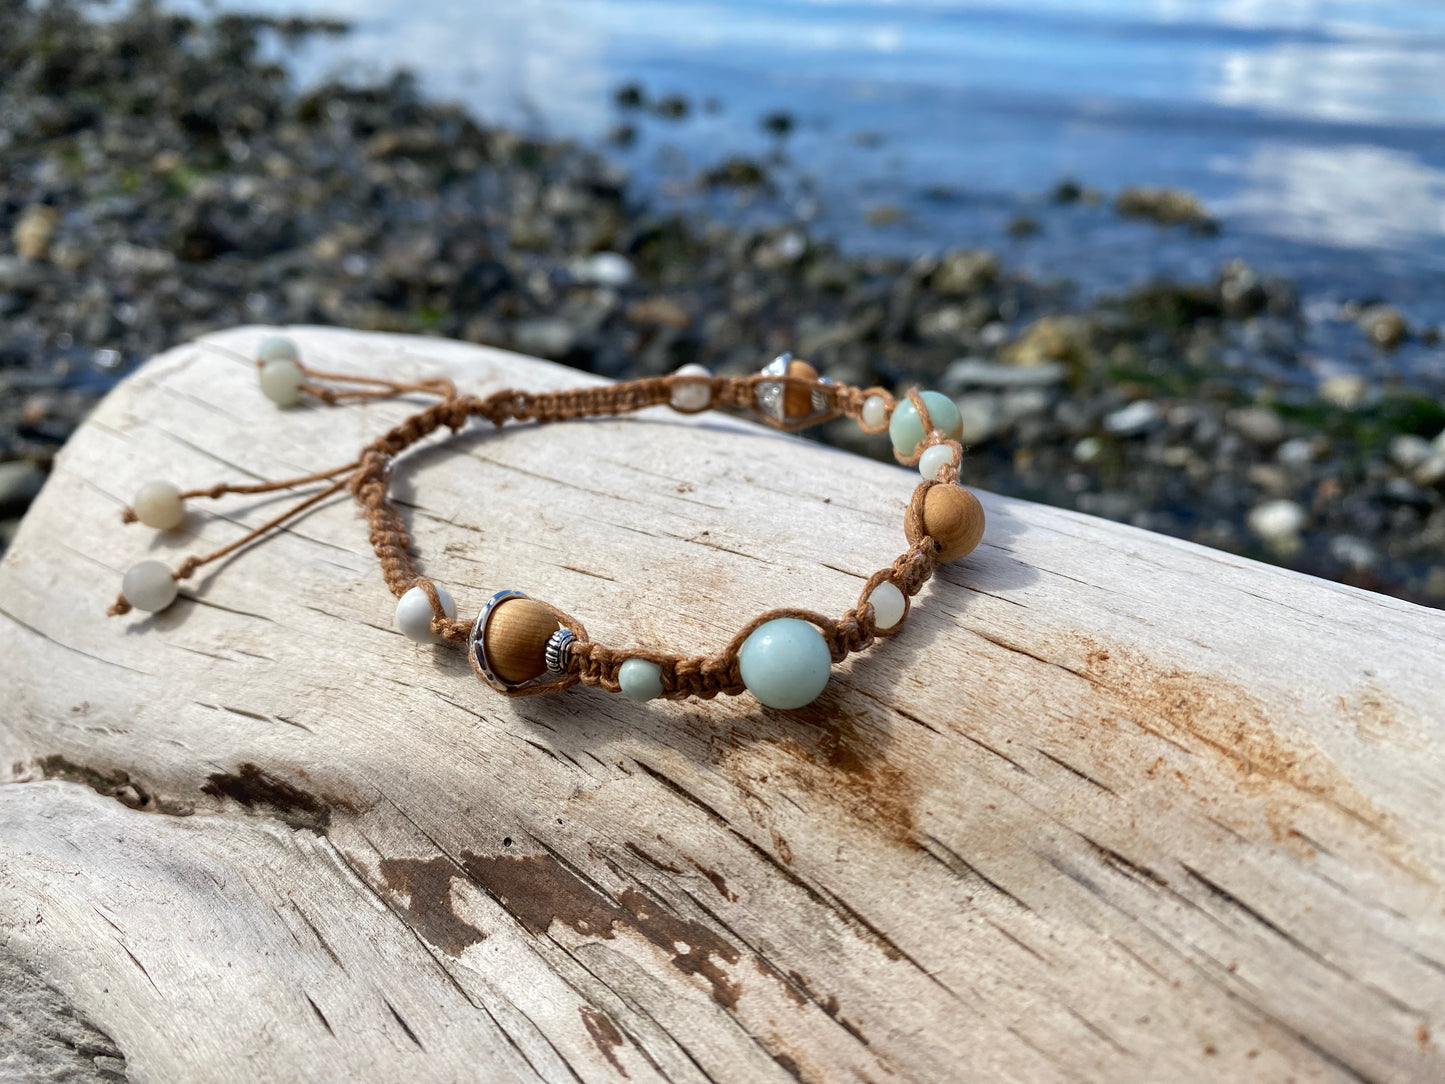 Beautiful Boho Braided Rustica Bracelet for any beach girl, sitting on a piece of driftwood with the ocean in the background